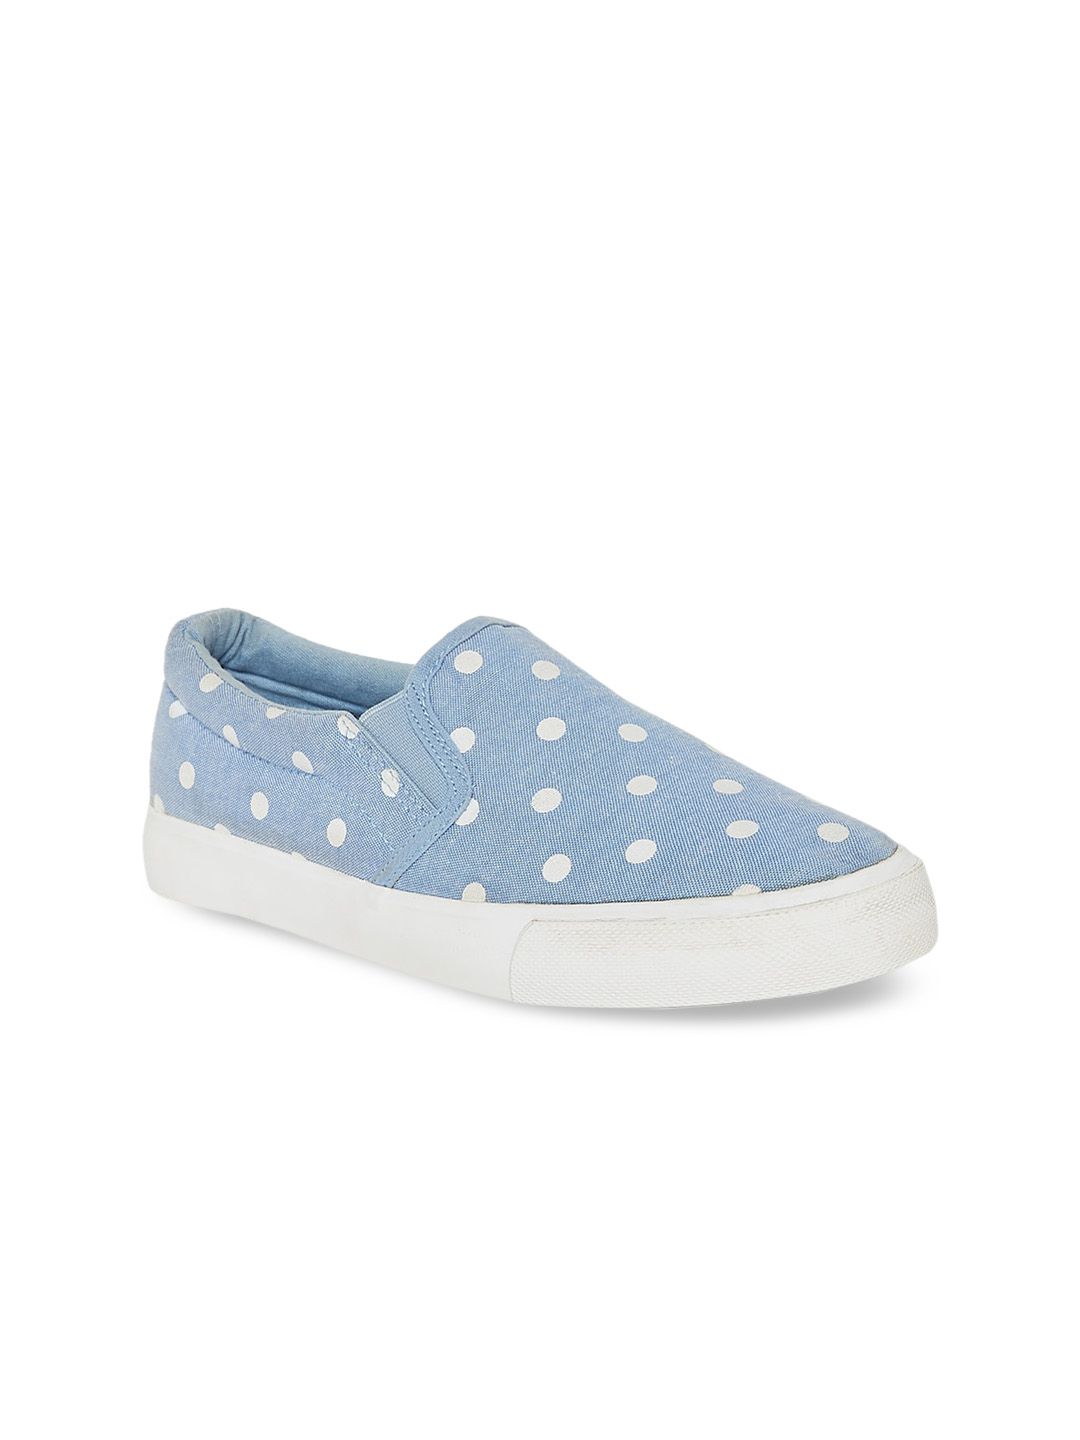 Forever Glam by Pantaloons Women Blue Printed Slip-On Denim Sneakers Price in India